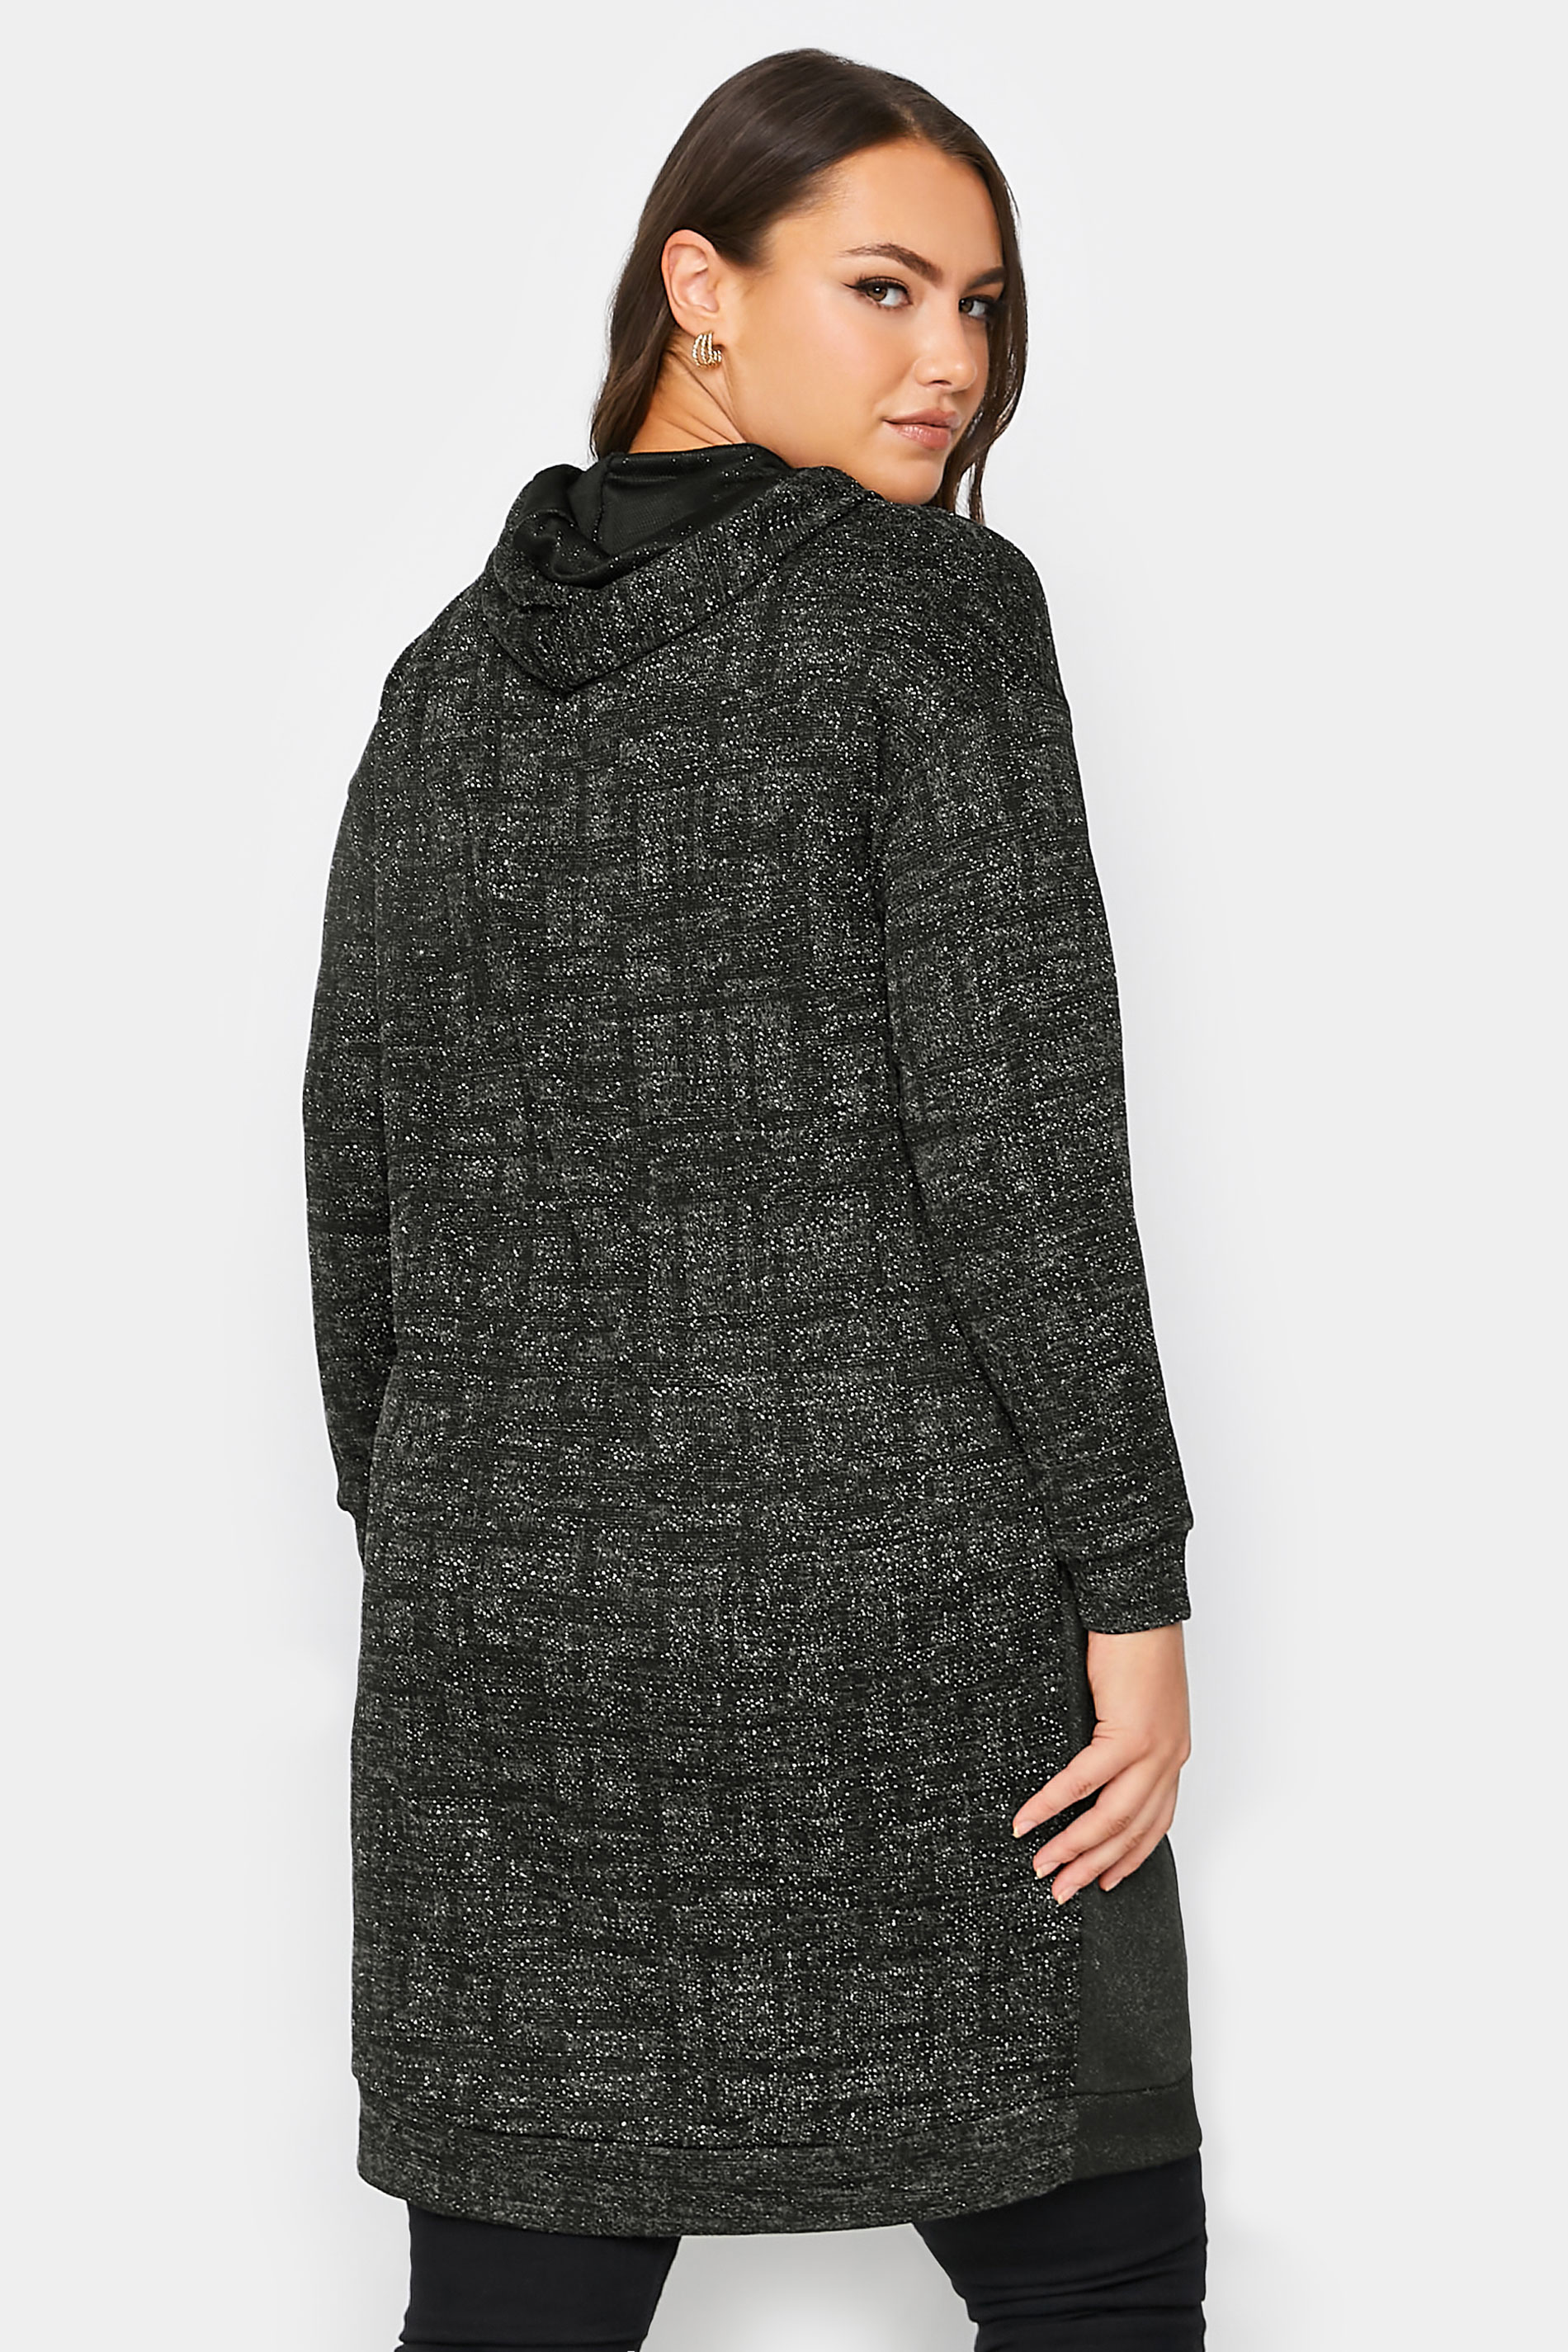 Curve Plus Size Black & Grey Soft Touch Glitter Hoodie Dress | Yours Clothing 3